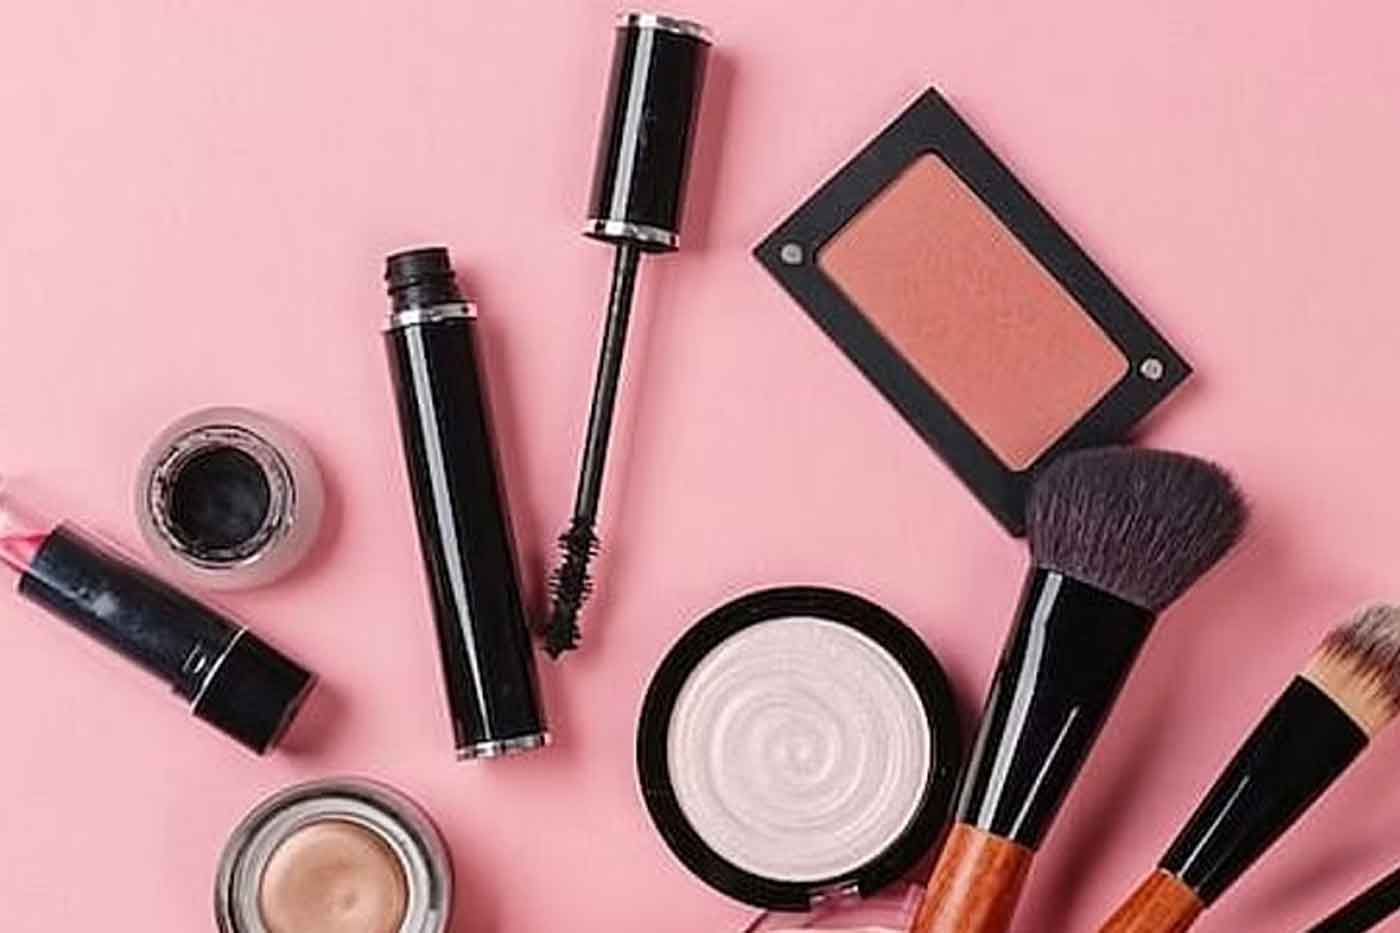 Inflation in beauty products and services remained high in FY 2023